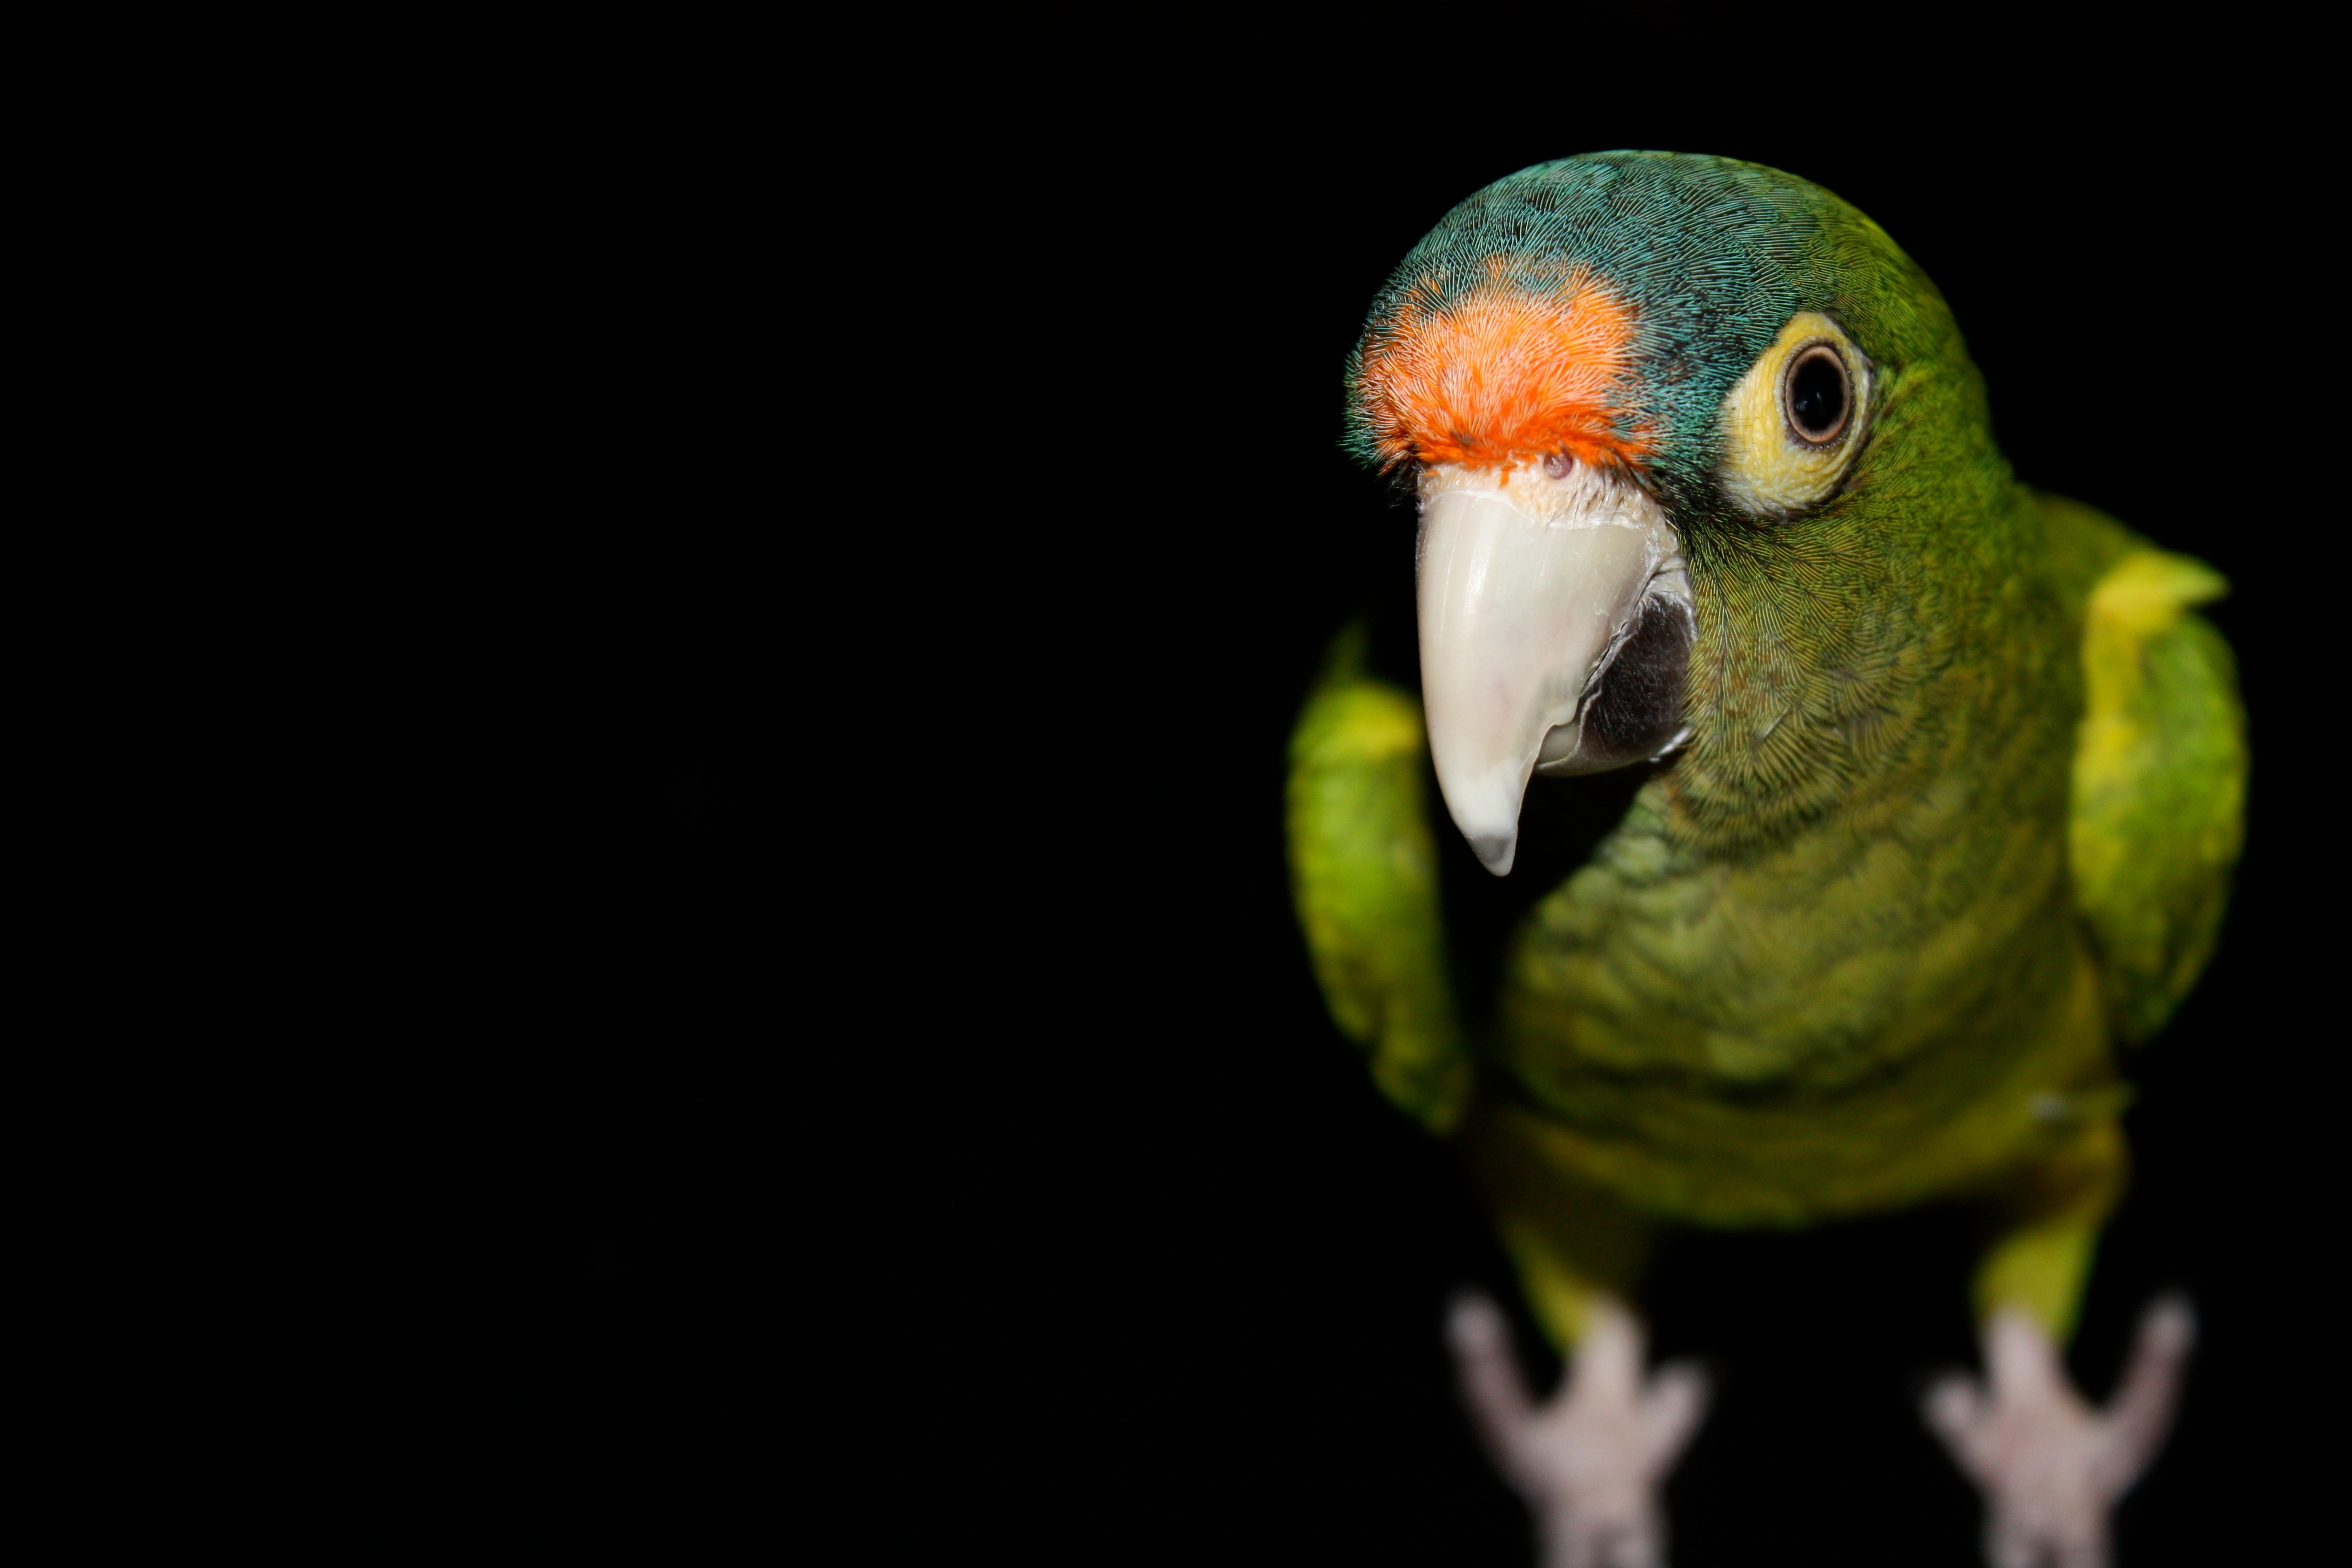 Green parrot on black background